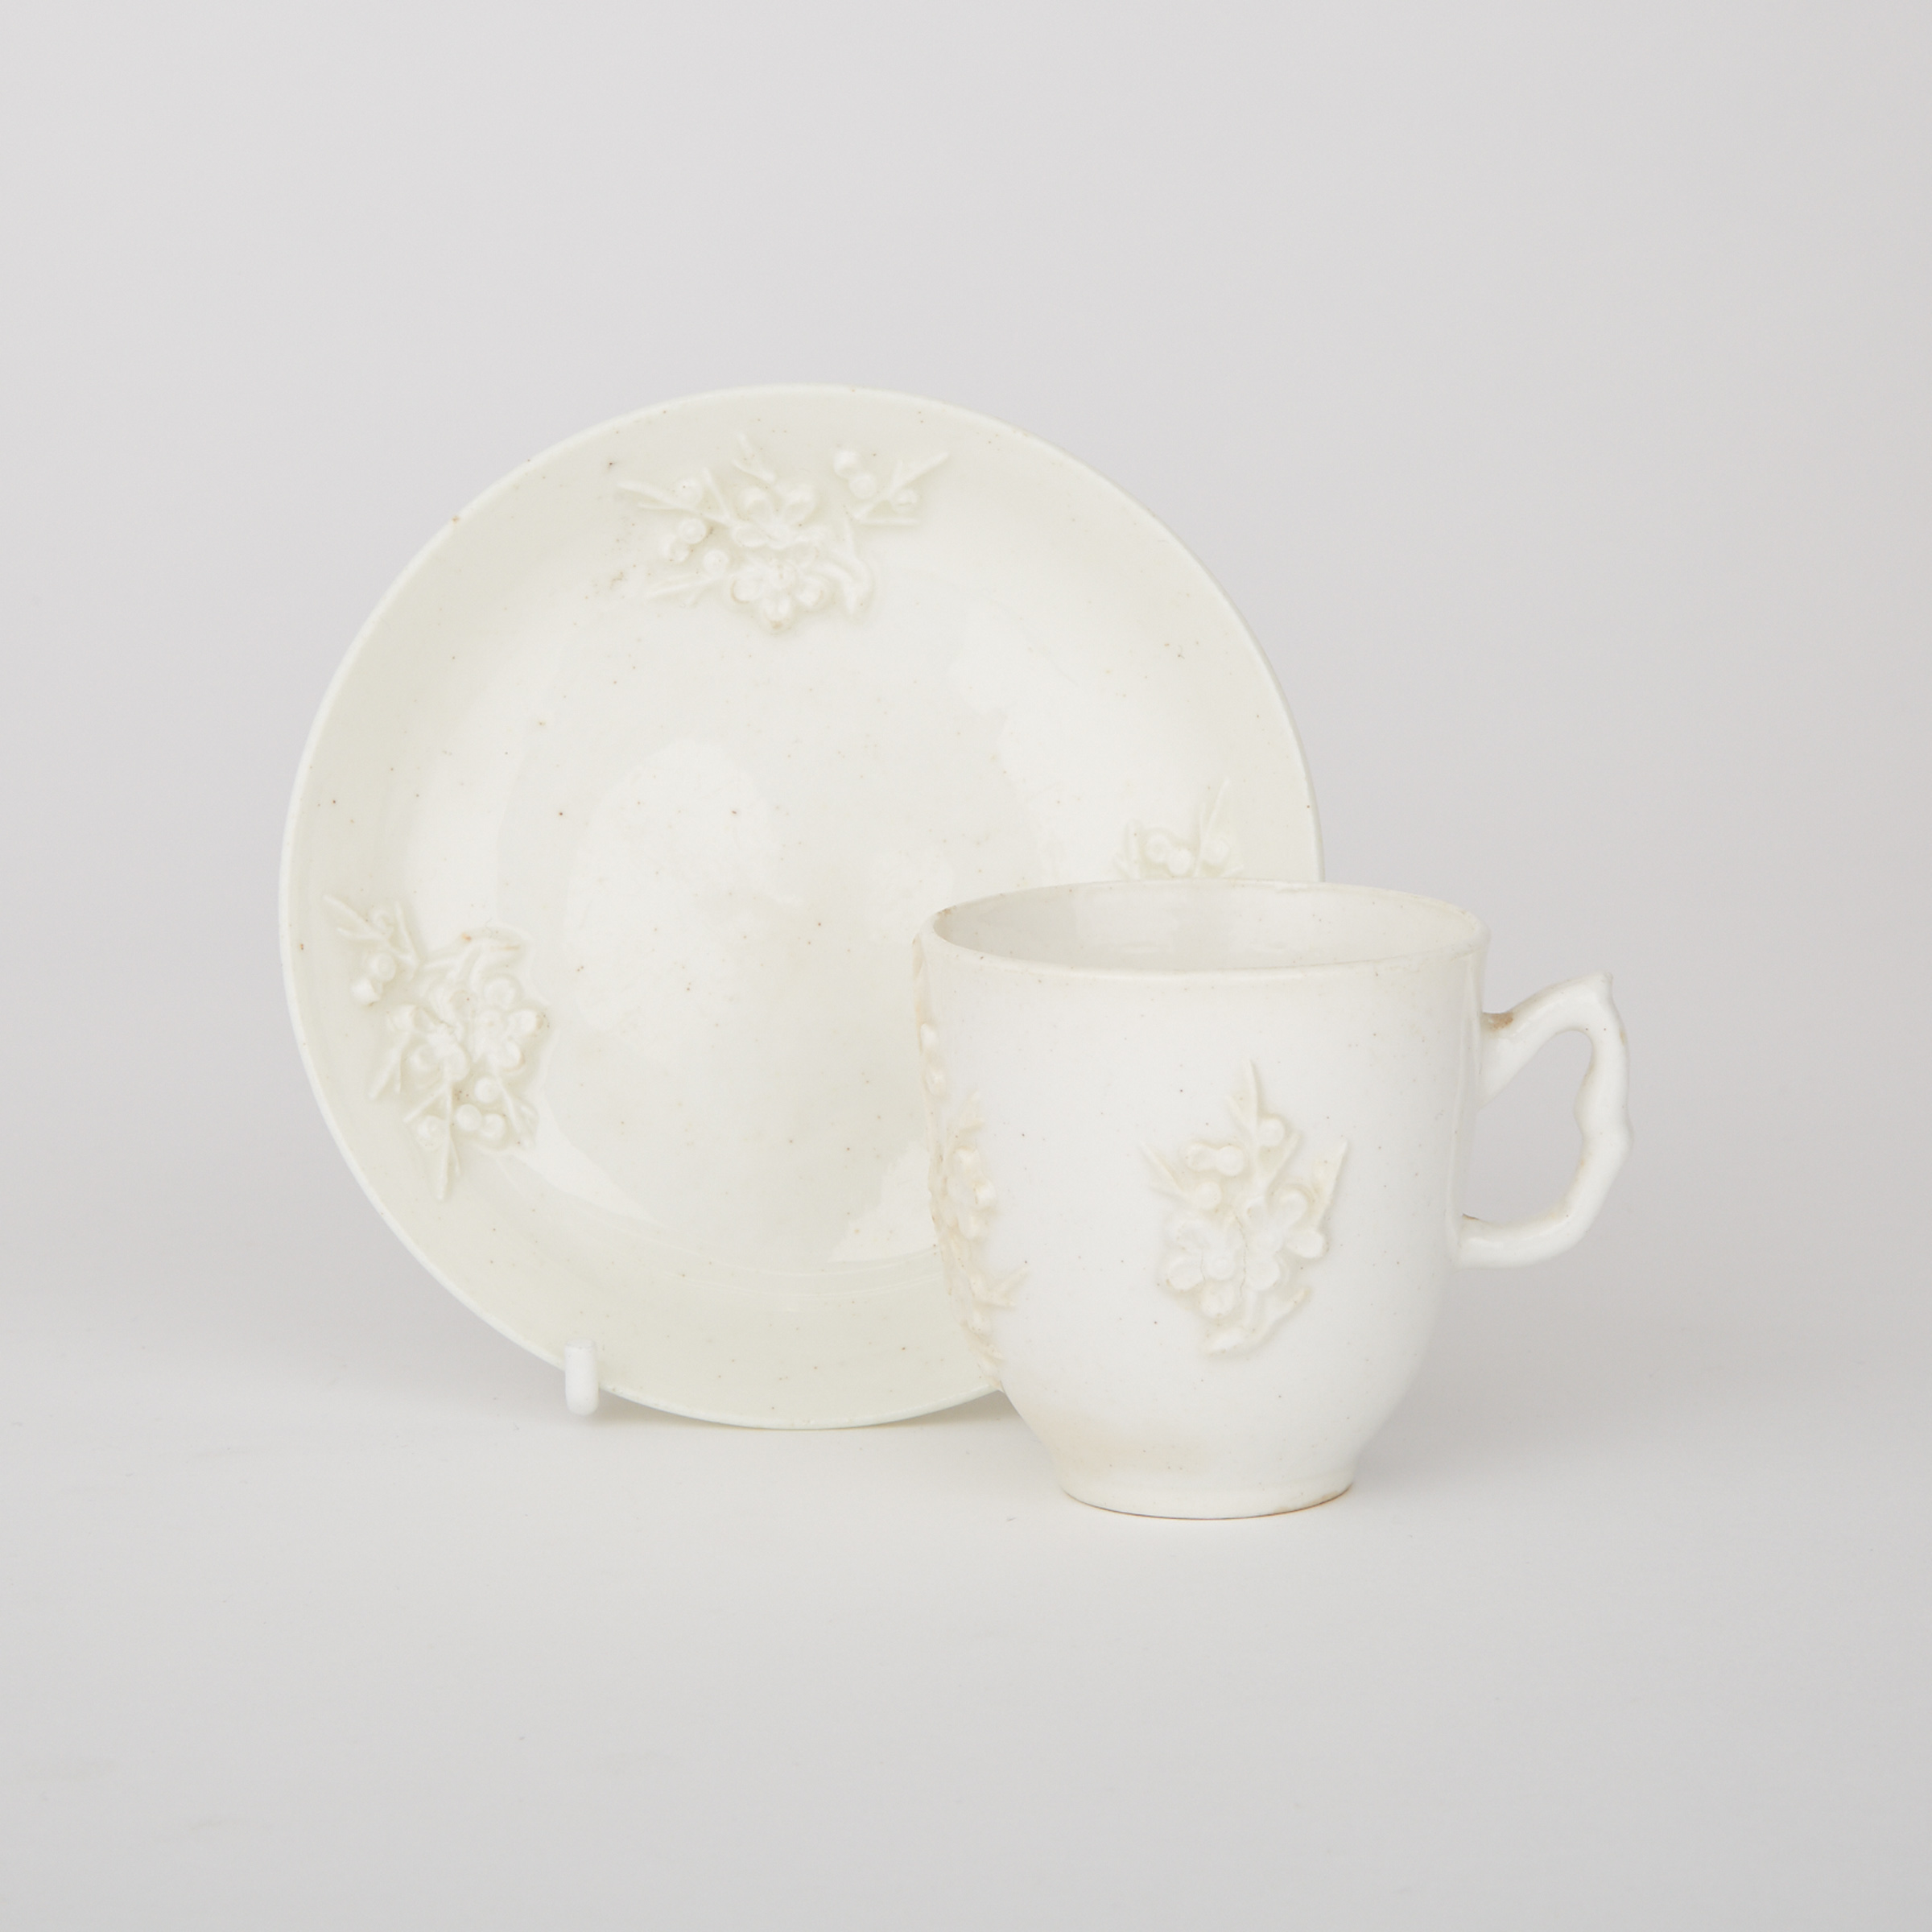 Bow White Glazed Moulded Prunus Cup and Saucer, c.1755